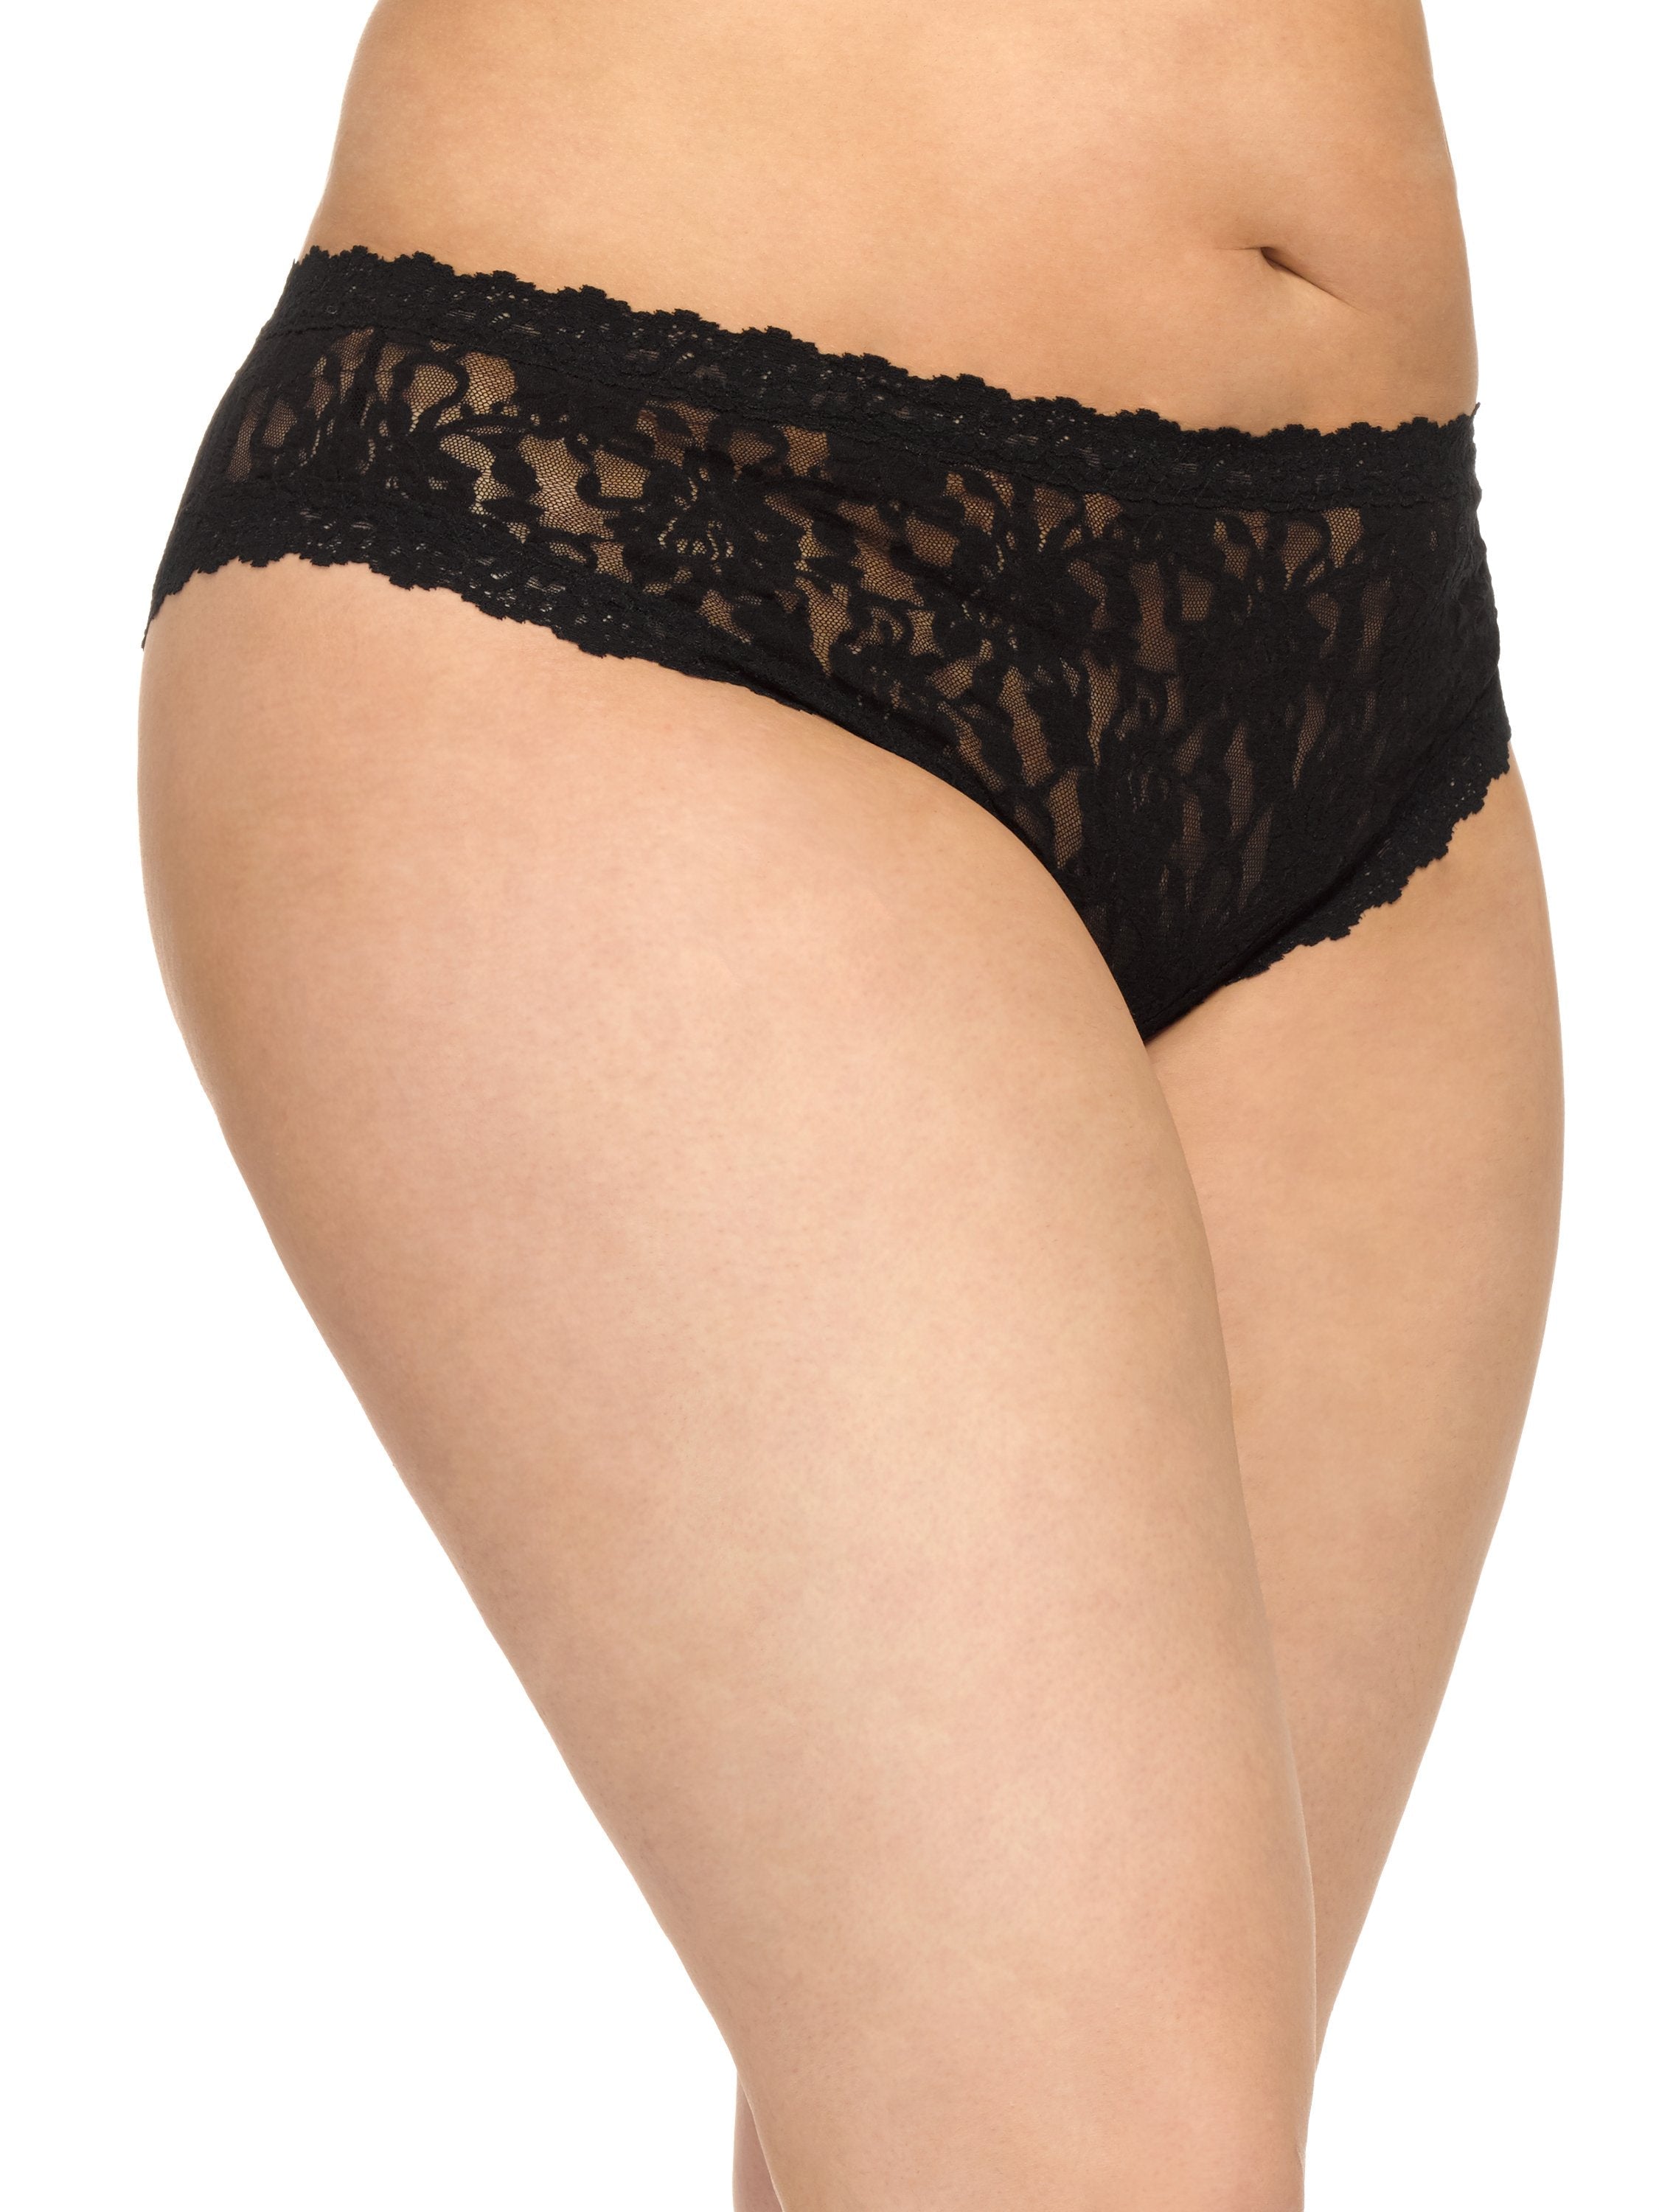 Cacique~New With Tags~Strappy-Back Cheeky Panty W/Lace Trim~Plus Siz 26-28W  (3X)